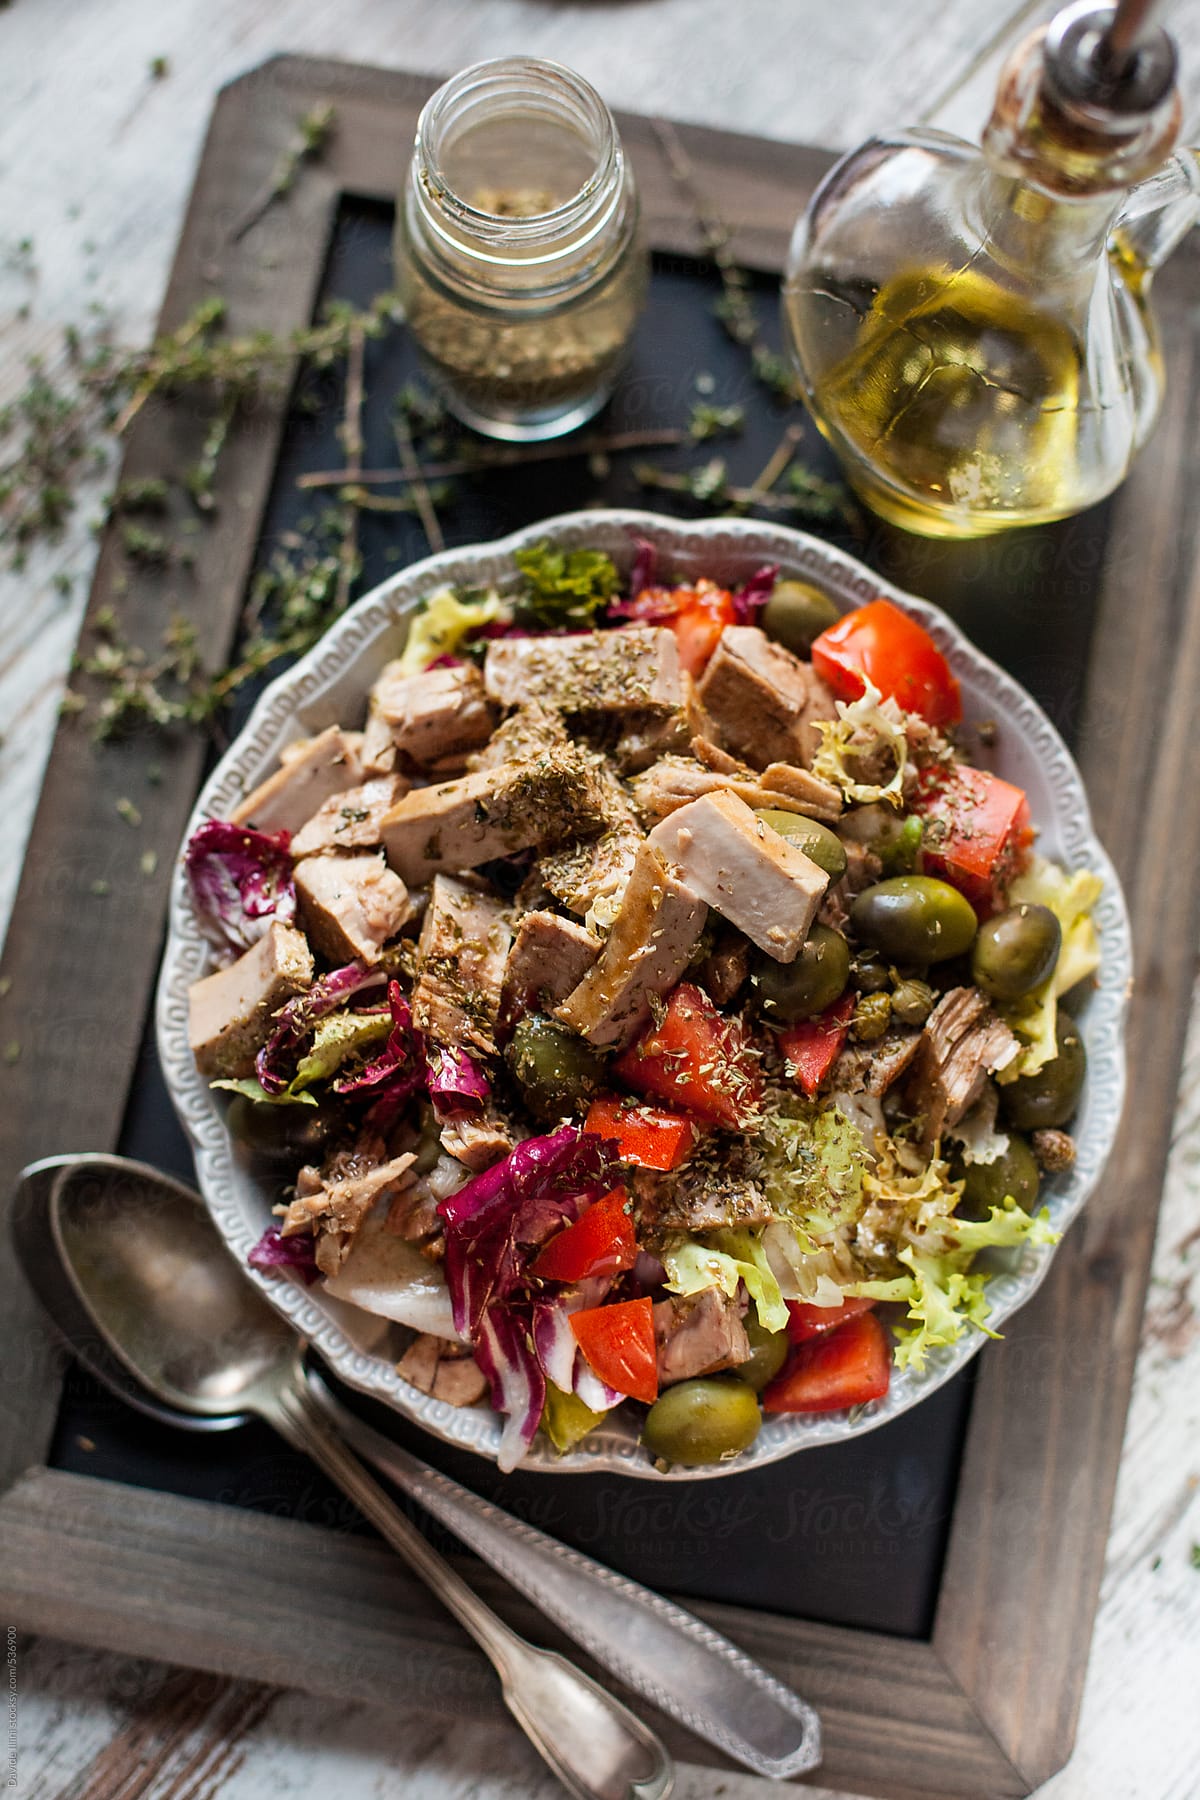 Mediterranean salad with tuna, olives and tomatoes